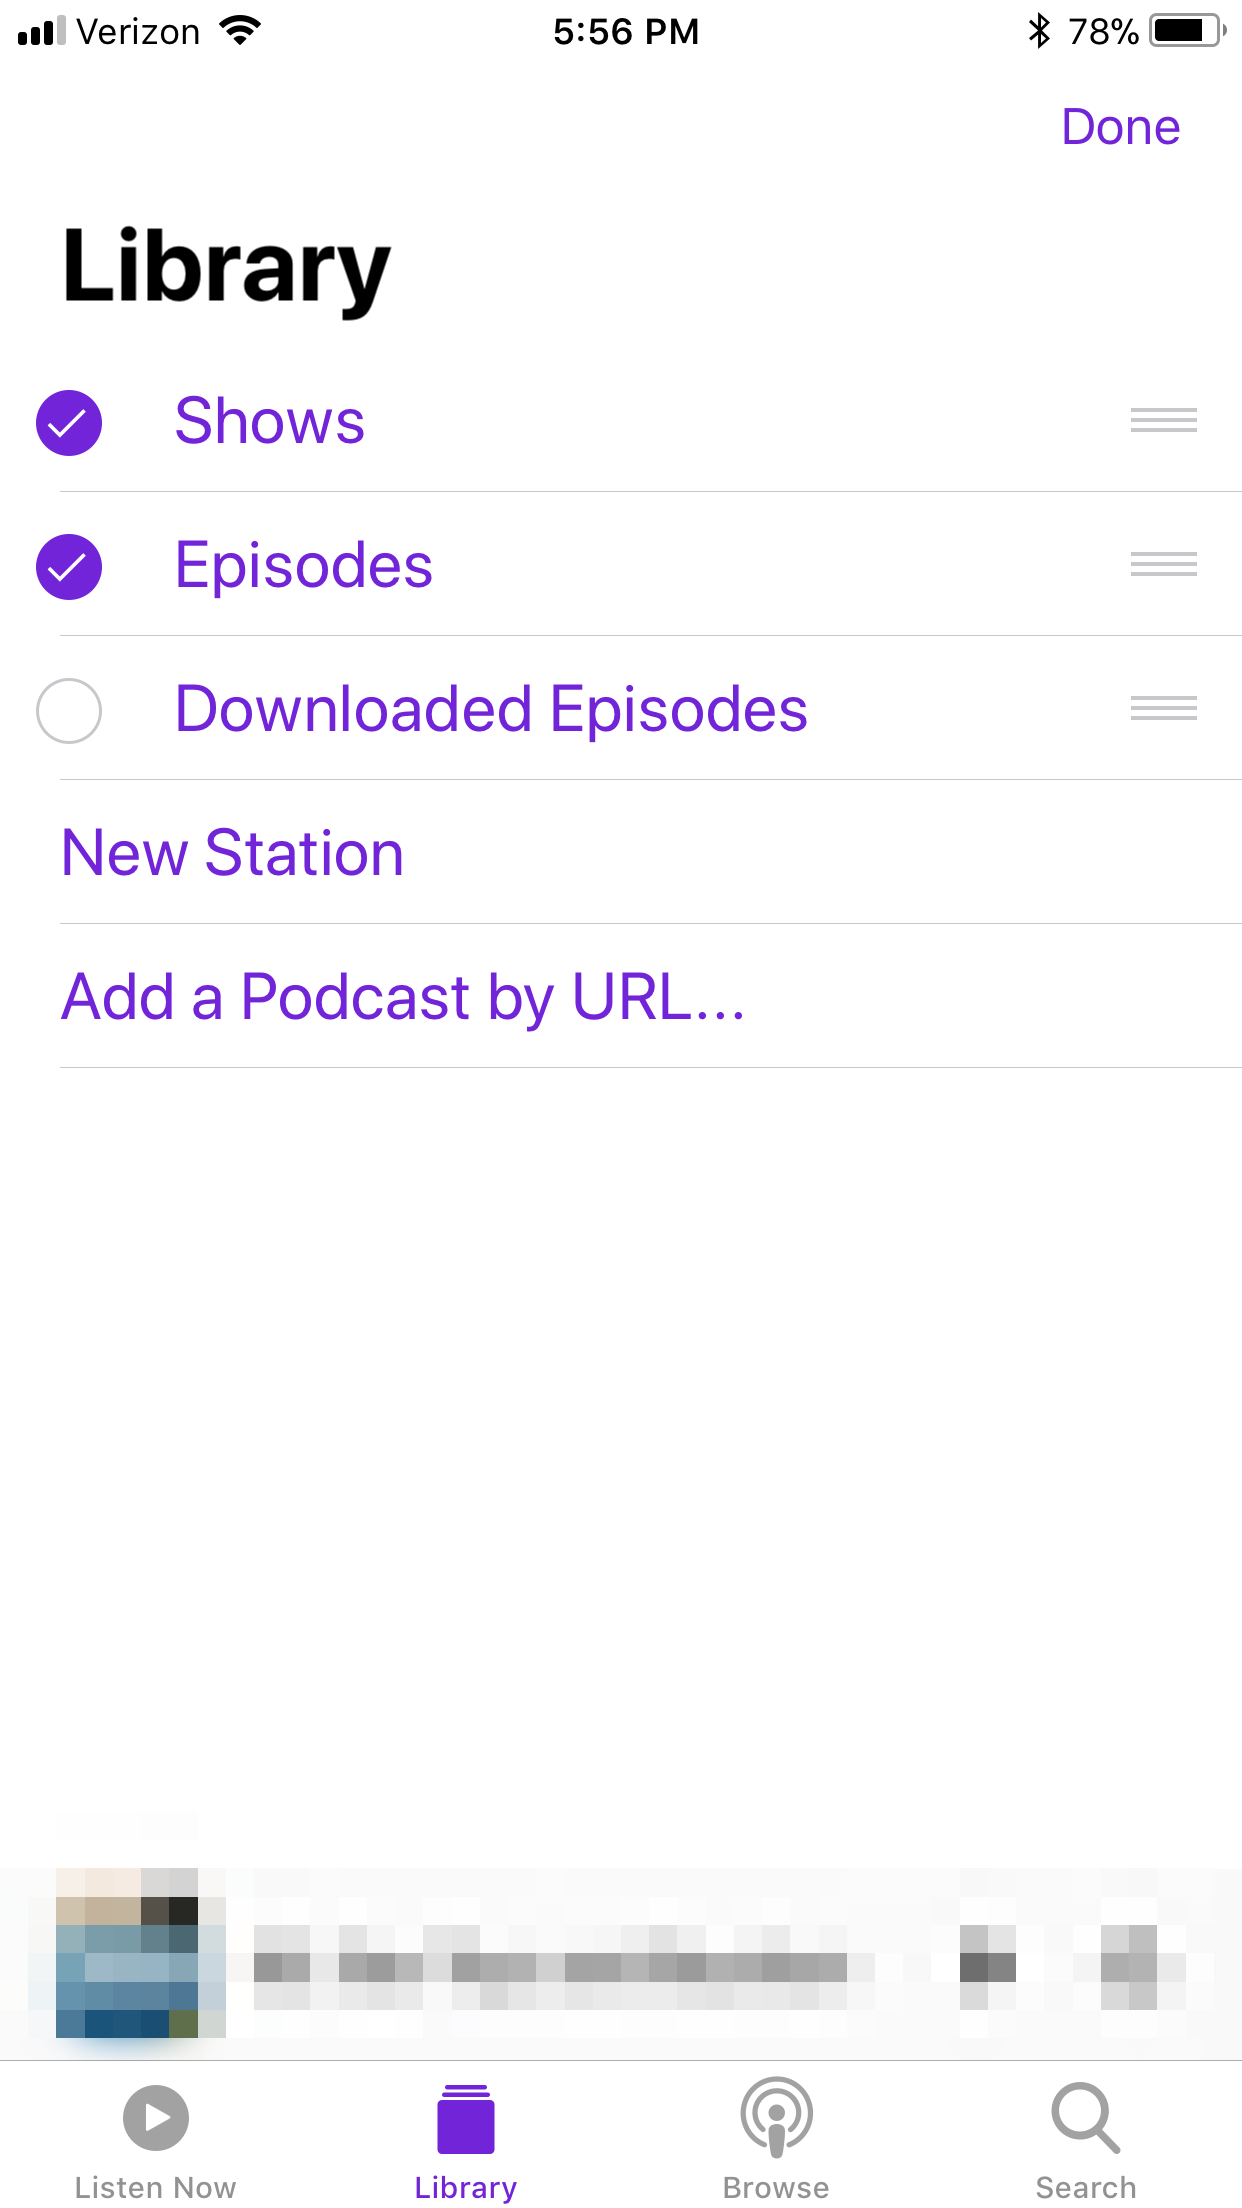 Add a podcast by URL